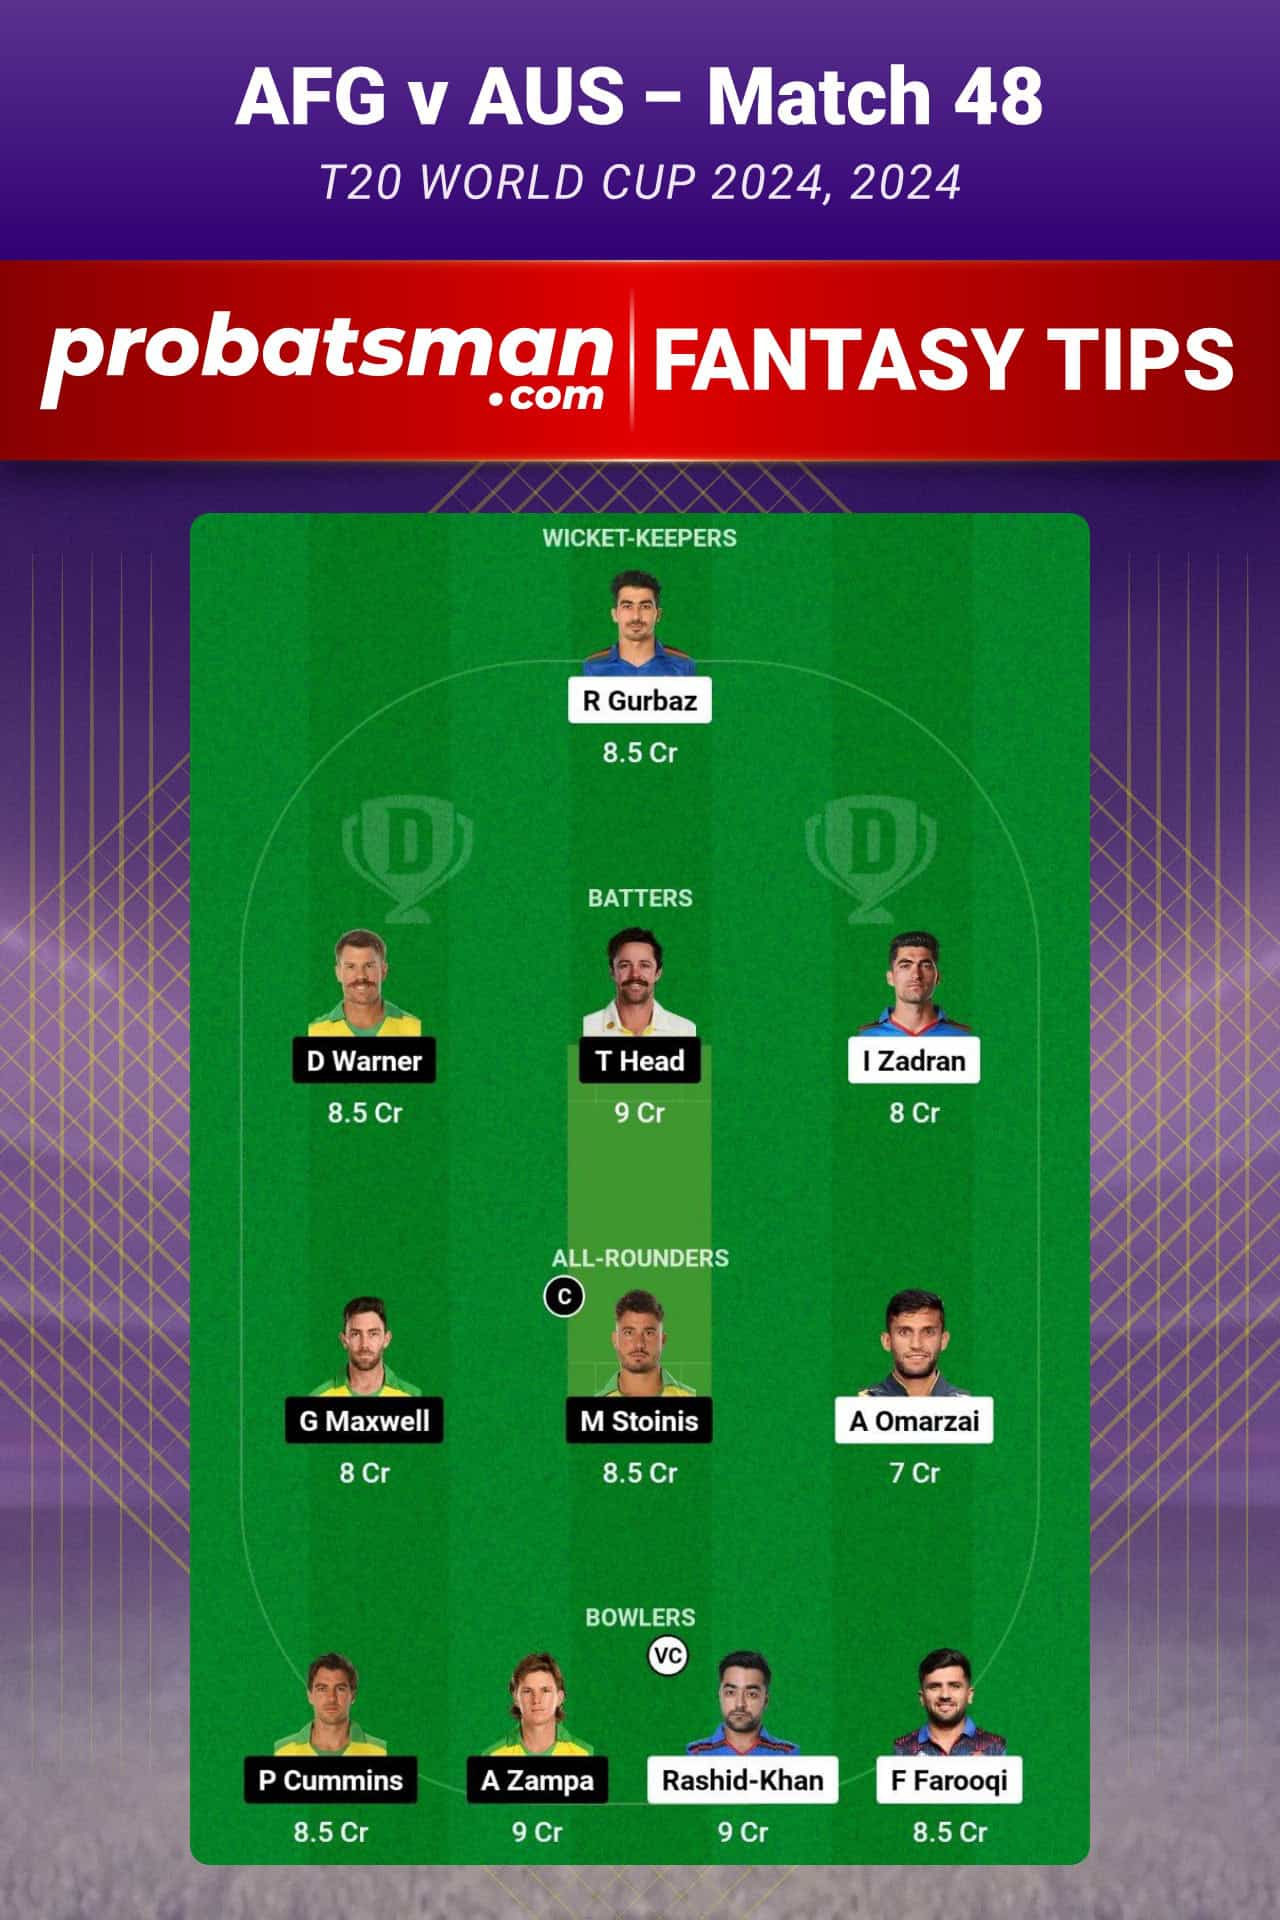 AFG vs AUS Dream11 Prediction For Match 48 of T20 World Cup 2024